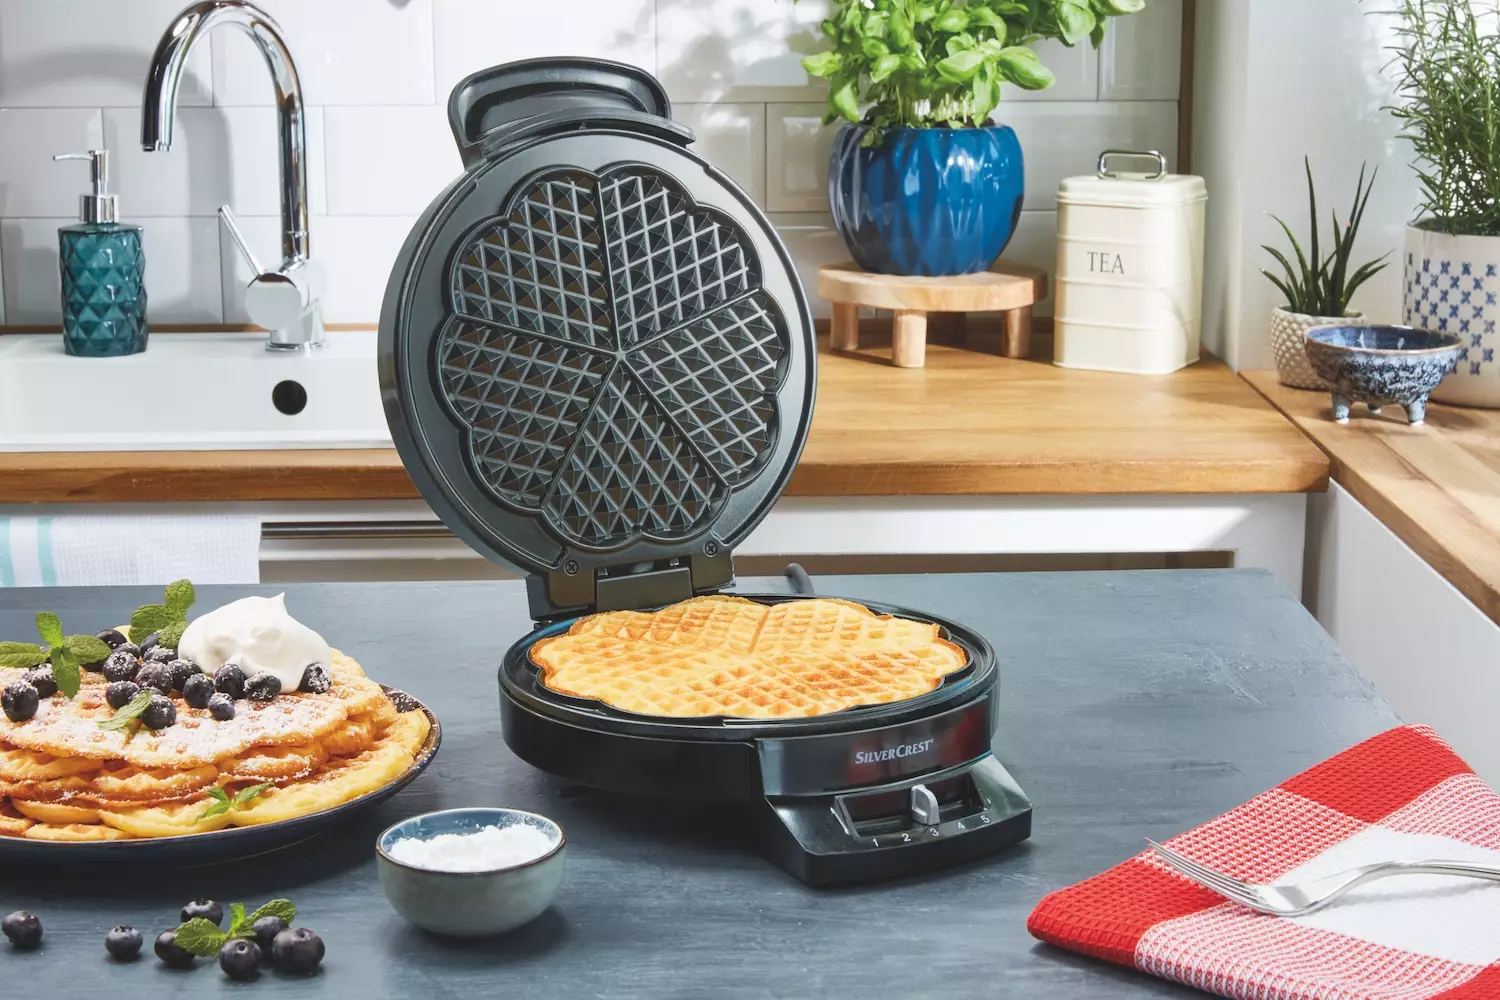 The waffle maker is £11.99 and available in store at Lidl (